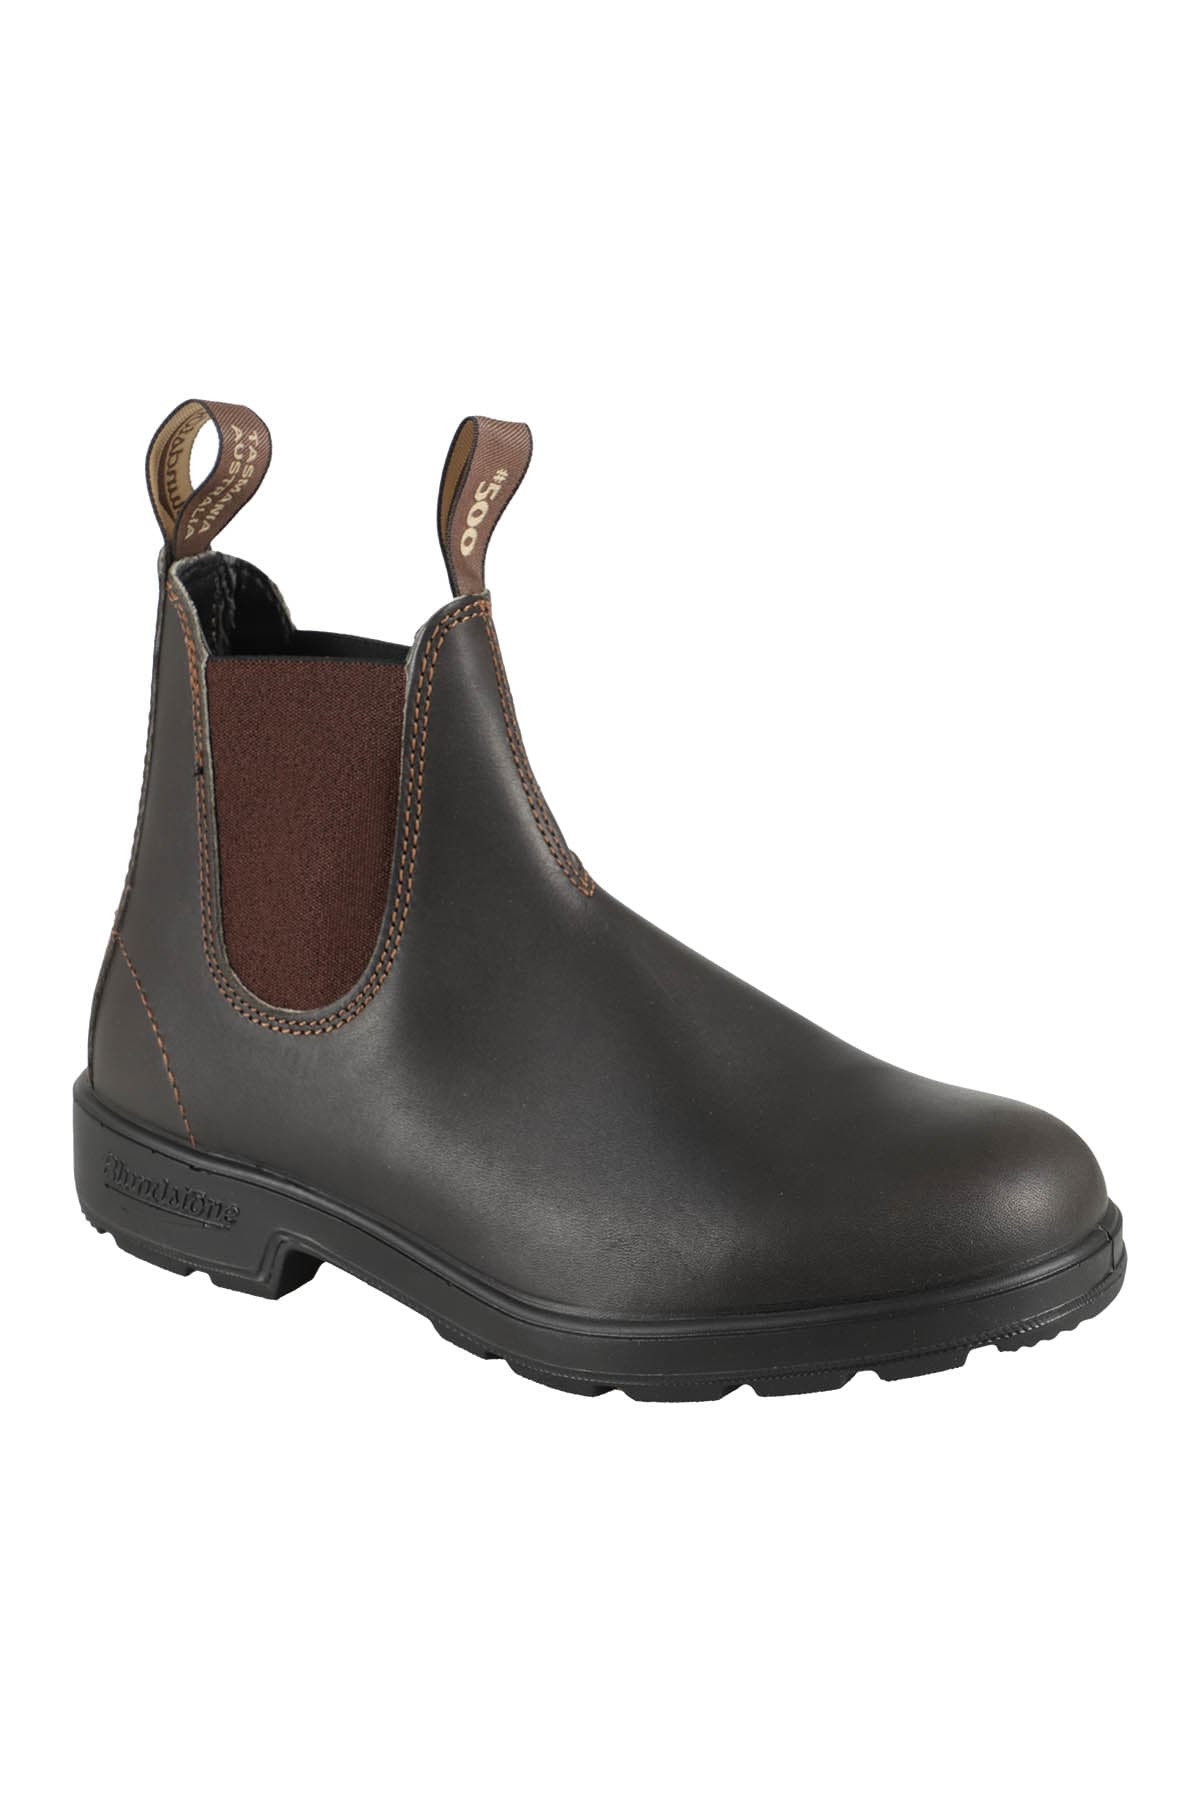 Shop Blundstone 500 In Stout Brown